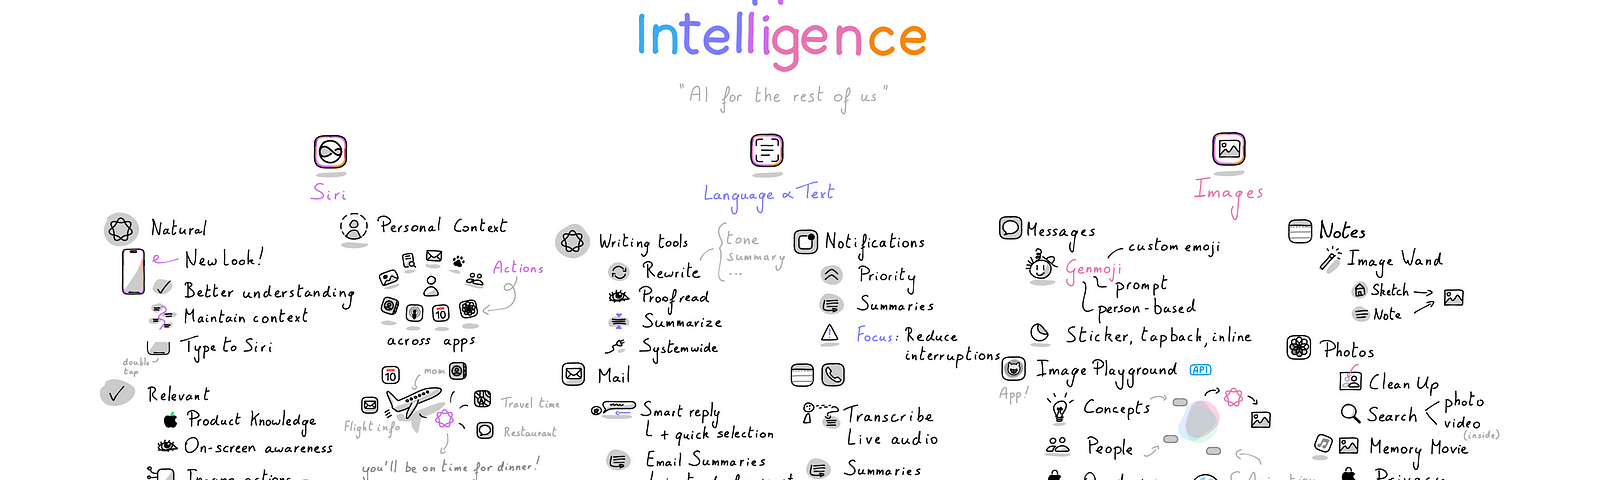 The Visual Summary of Apple Intelligence, as presented on WWDC in June 2024.